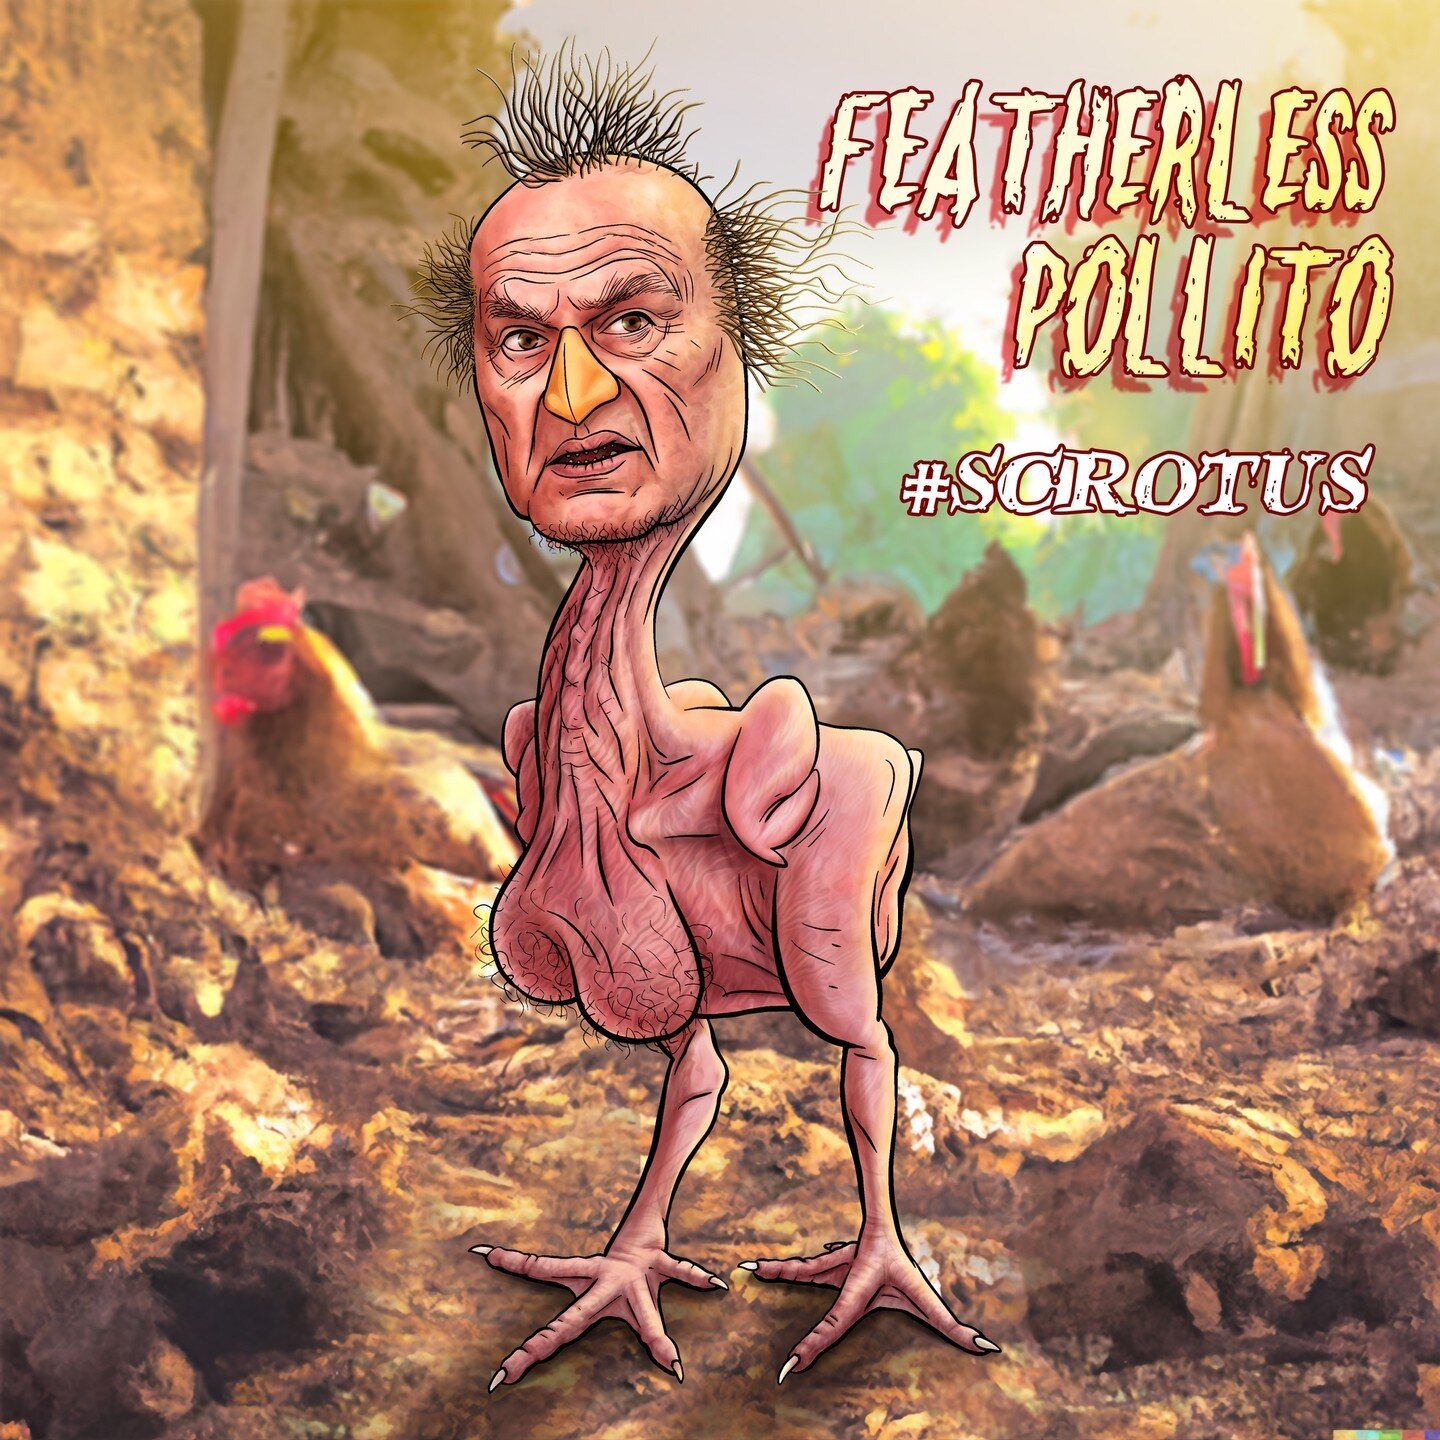 #SCROTUS Part 3!⁠
Ah, Samuel Alito... You're probably the worst of all, but you often manage to fly under most people's radar. Well, maybe not &quot;fly&quot; with those stubby, featherless wings. ⁠🐔🍗🤢⁠
⁠
Sidenote: Did you know there's a breed of 